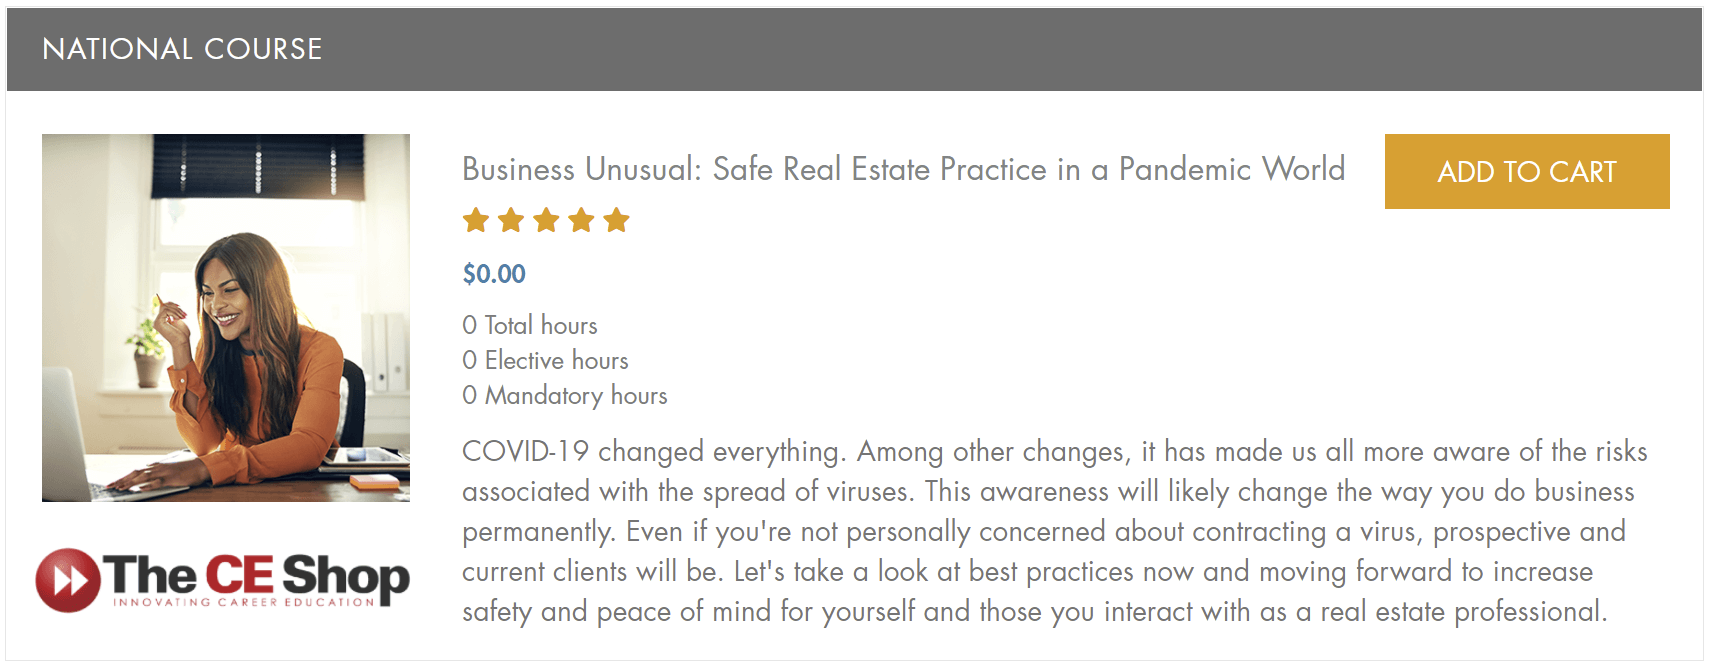 The CE Shop: Save Real Estate Practice in a Pandemic World Overview